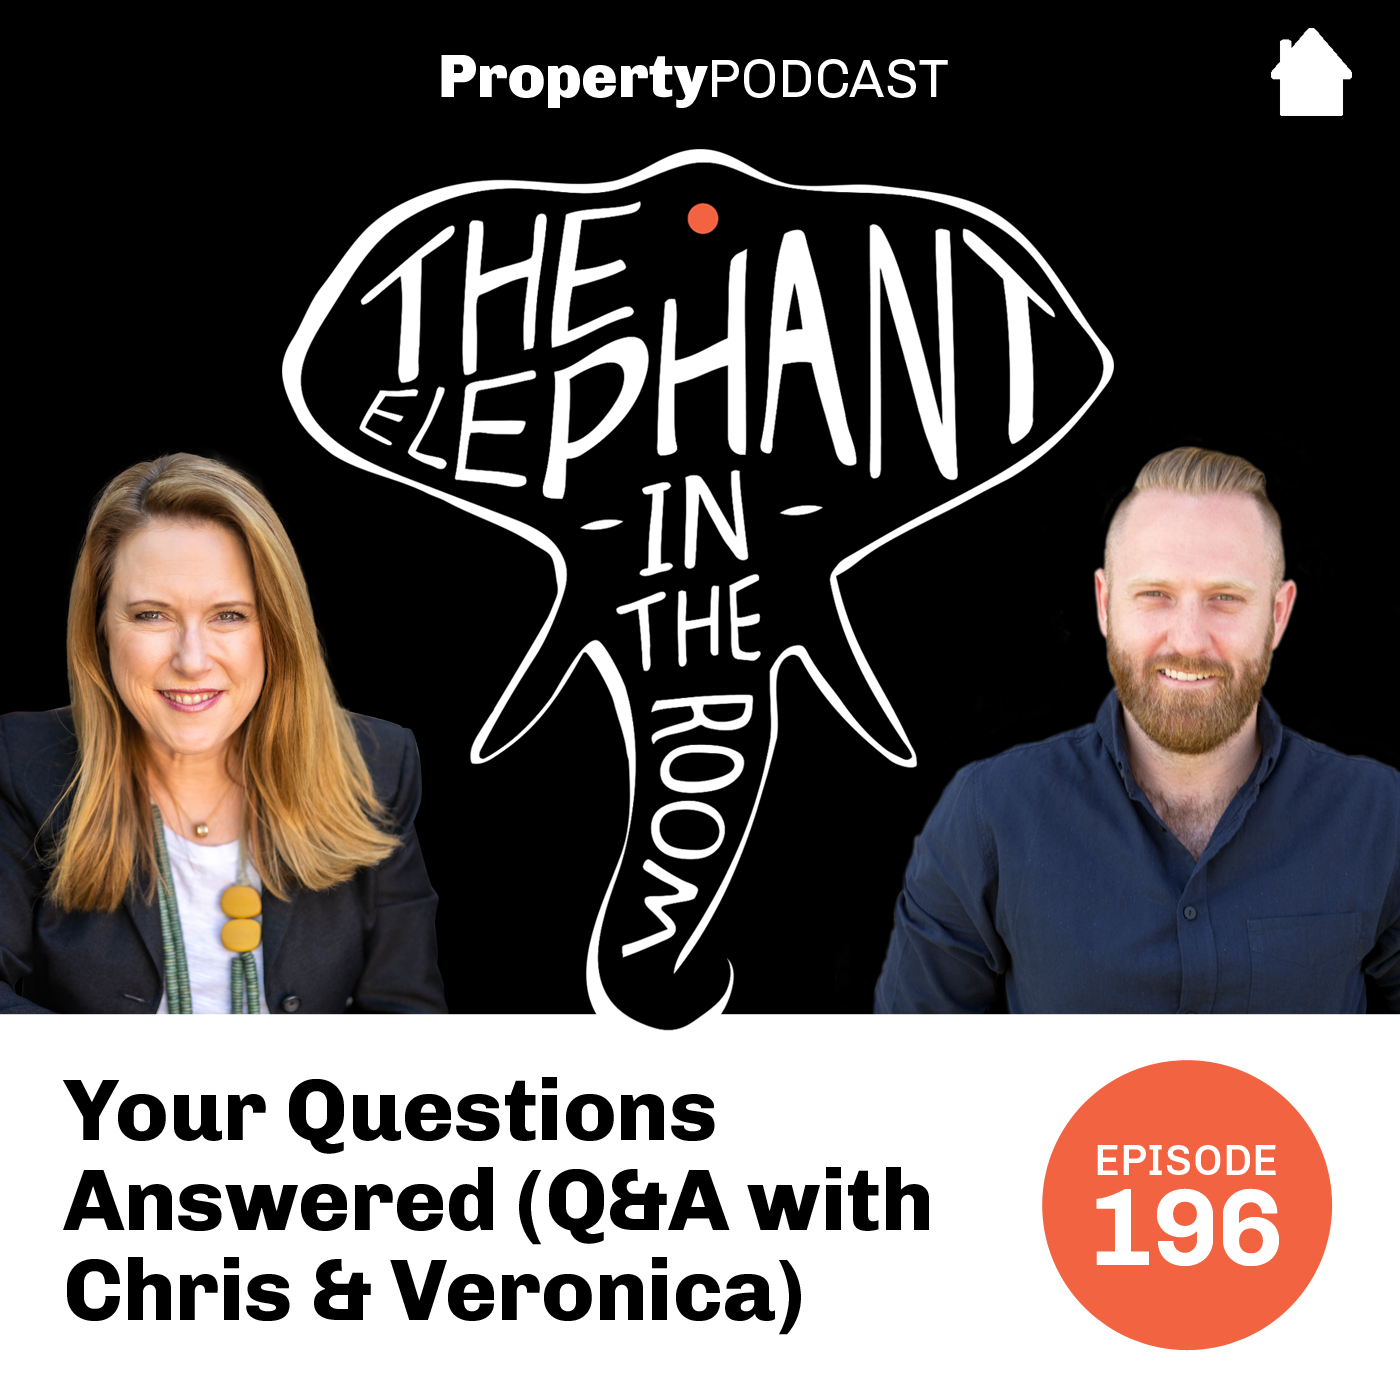 Your Questions Answered (Q&A with Chris & Veronica)